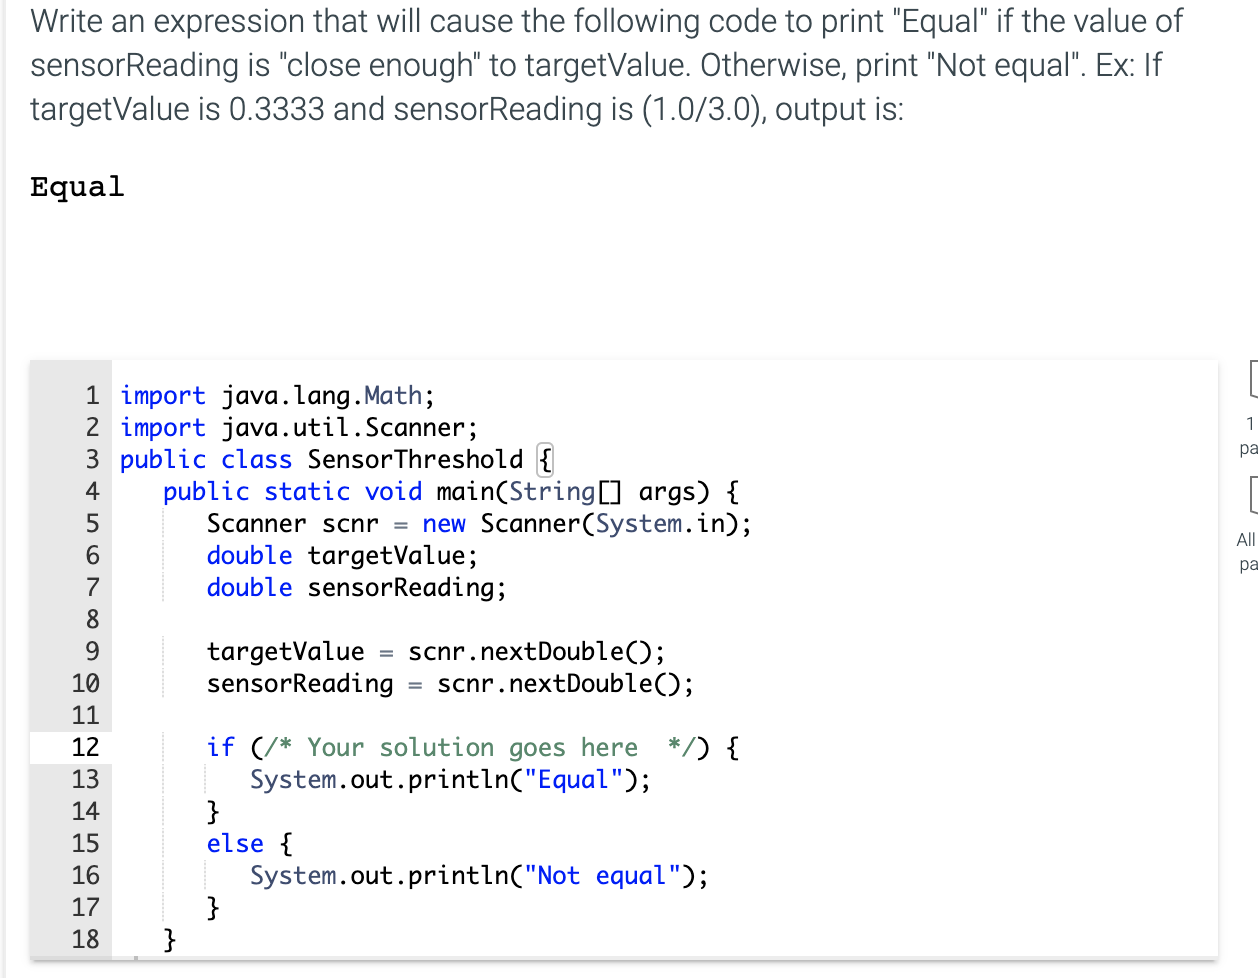 Write an expression that will cause the following code to print "Equal" if the value of
sensorReading is "close enough" to targetValue. Otherwise, print "Not equal". Ex: If
targetValue is 0.3333 and sensorReading is (1.0/3.0), output is:
Equal
1 import java.lang.Math;
2 import java.util.Scanner;
3 public class SensorThreshold {
public static void main(String[] args) {
Scanner scnr = new Scanner(System.in);
double targetValue;
double sensorReading;
4
6.
7
8
9.
targetValue = scnr.nextDouble();
sensorReading
10
scnr.nextDouble();
11
if (/* Your solution goes here */) {
System.out.println("Equal");
}
else {
System.out.println("Not equal");
}
}
12
13
14
15
16
17
18
